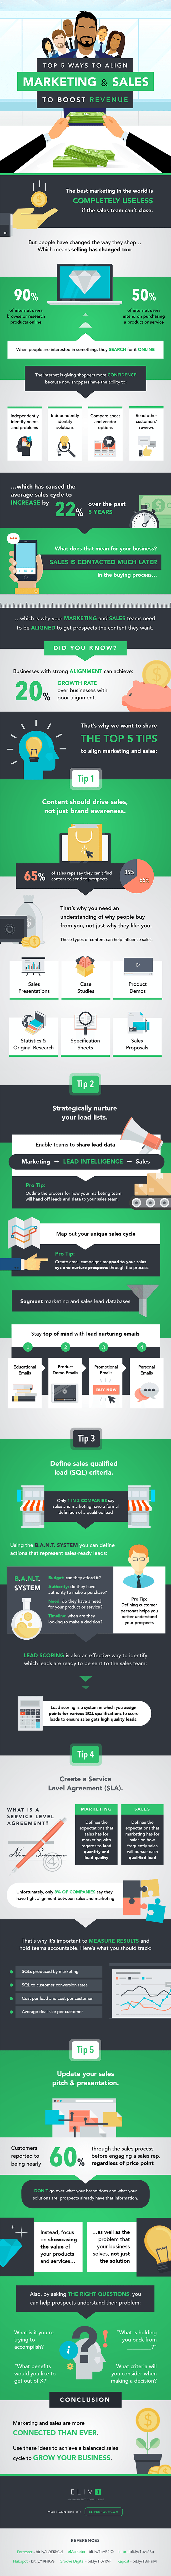 top ways to align sales and marketing